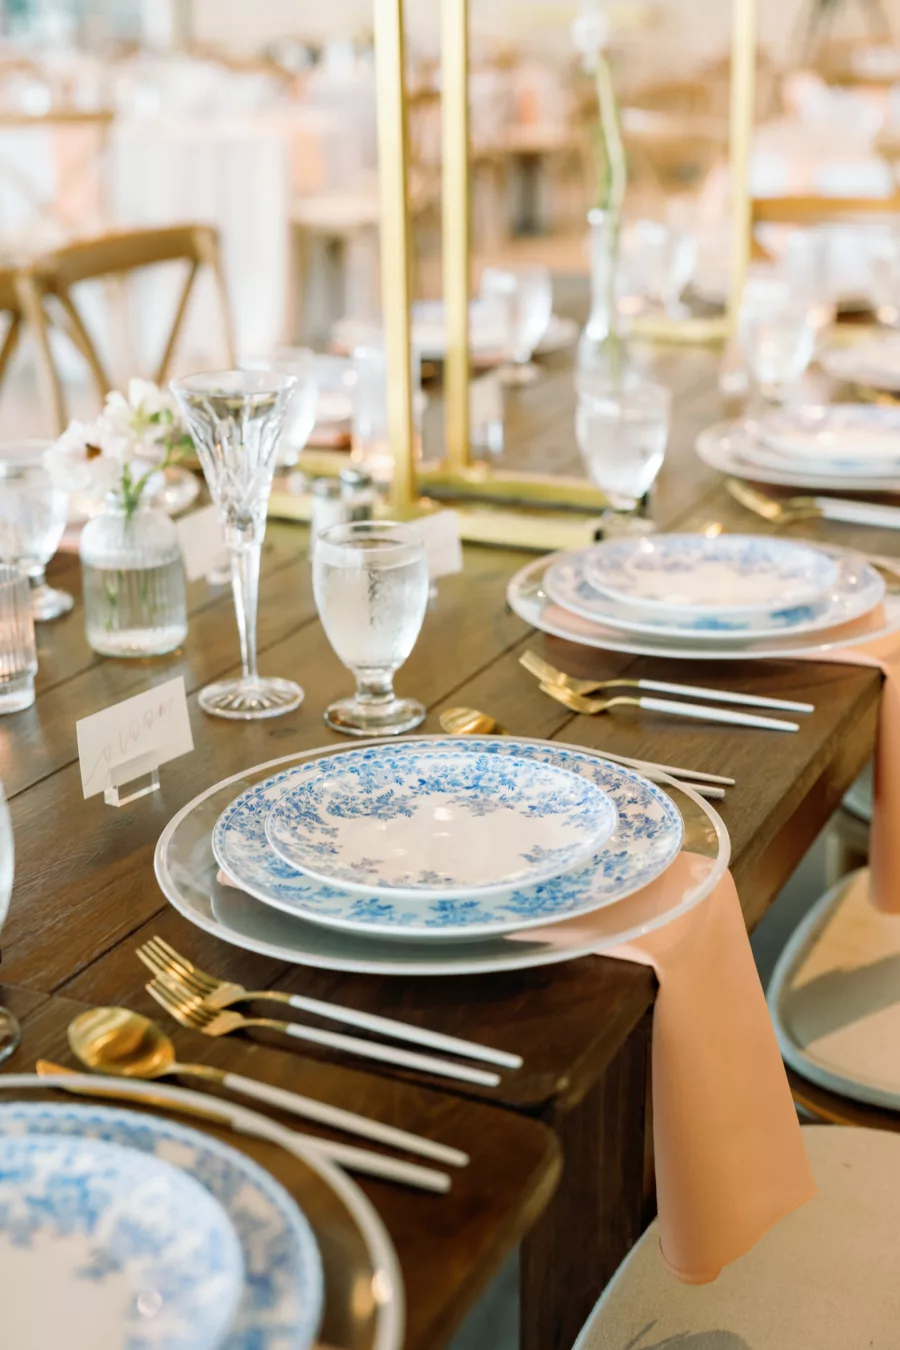 Romantic Spring Pastel Pink and Blue Wedding Reception Decor Ideas | Blue Floral China with White and Gold Flatware | Rustic Wooden Feasting Table Inspiration | Tampa Bay Planner Wilder Mind Events